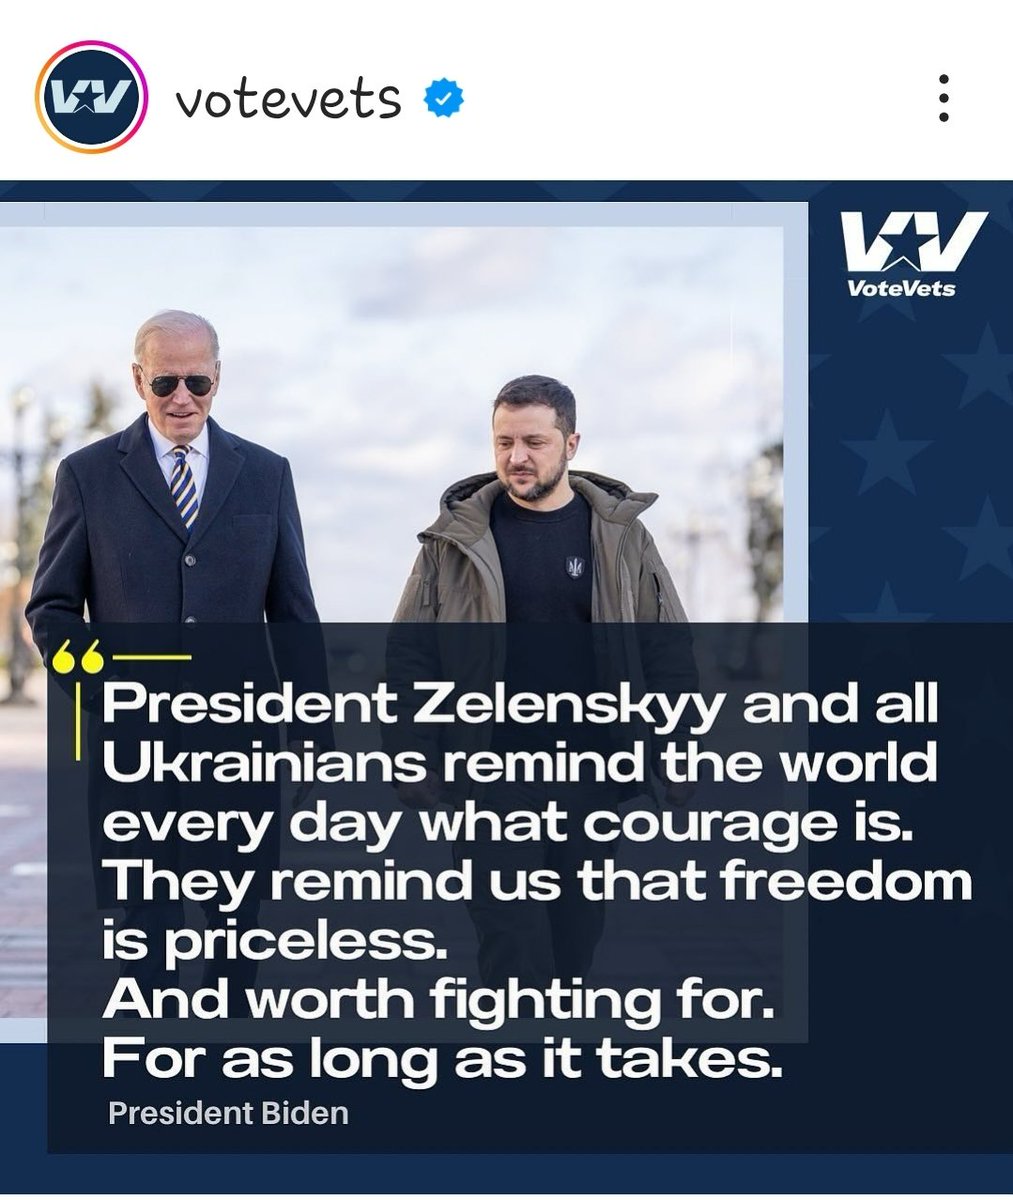 If you're not smart enough to see the bigger picture that Zelensky is holding his own against Putin invading Europe, then you should ask yourself some serious questions about your own mentality. Zelensky is one of the bravest men I've ever seen. Along with A Navalny trying to…